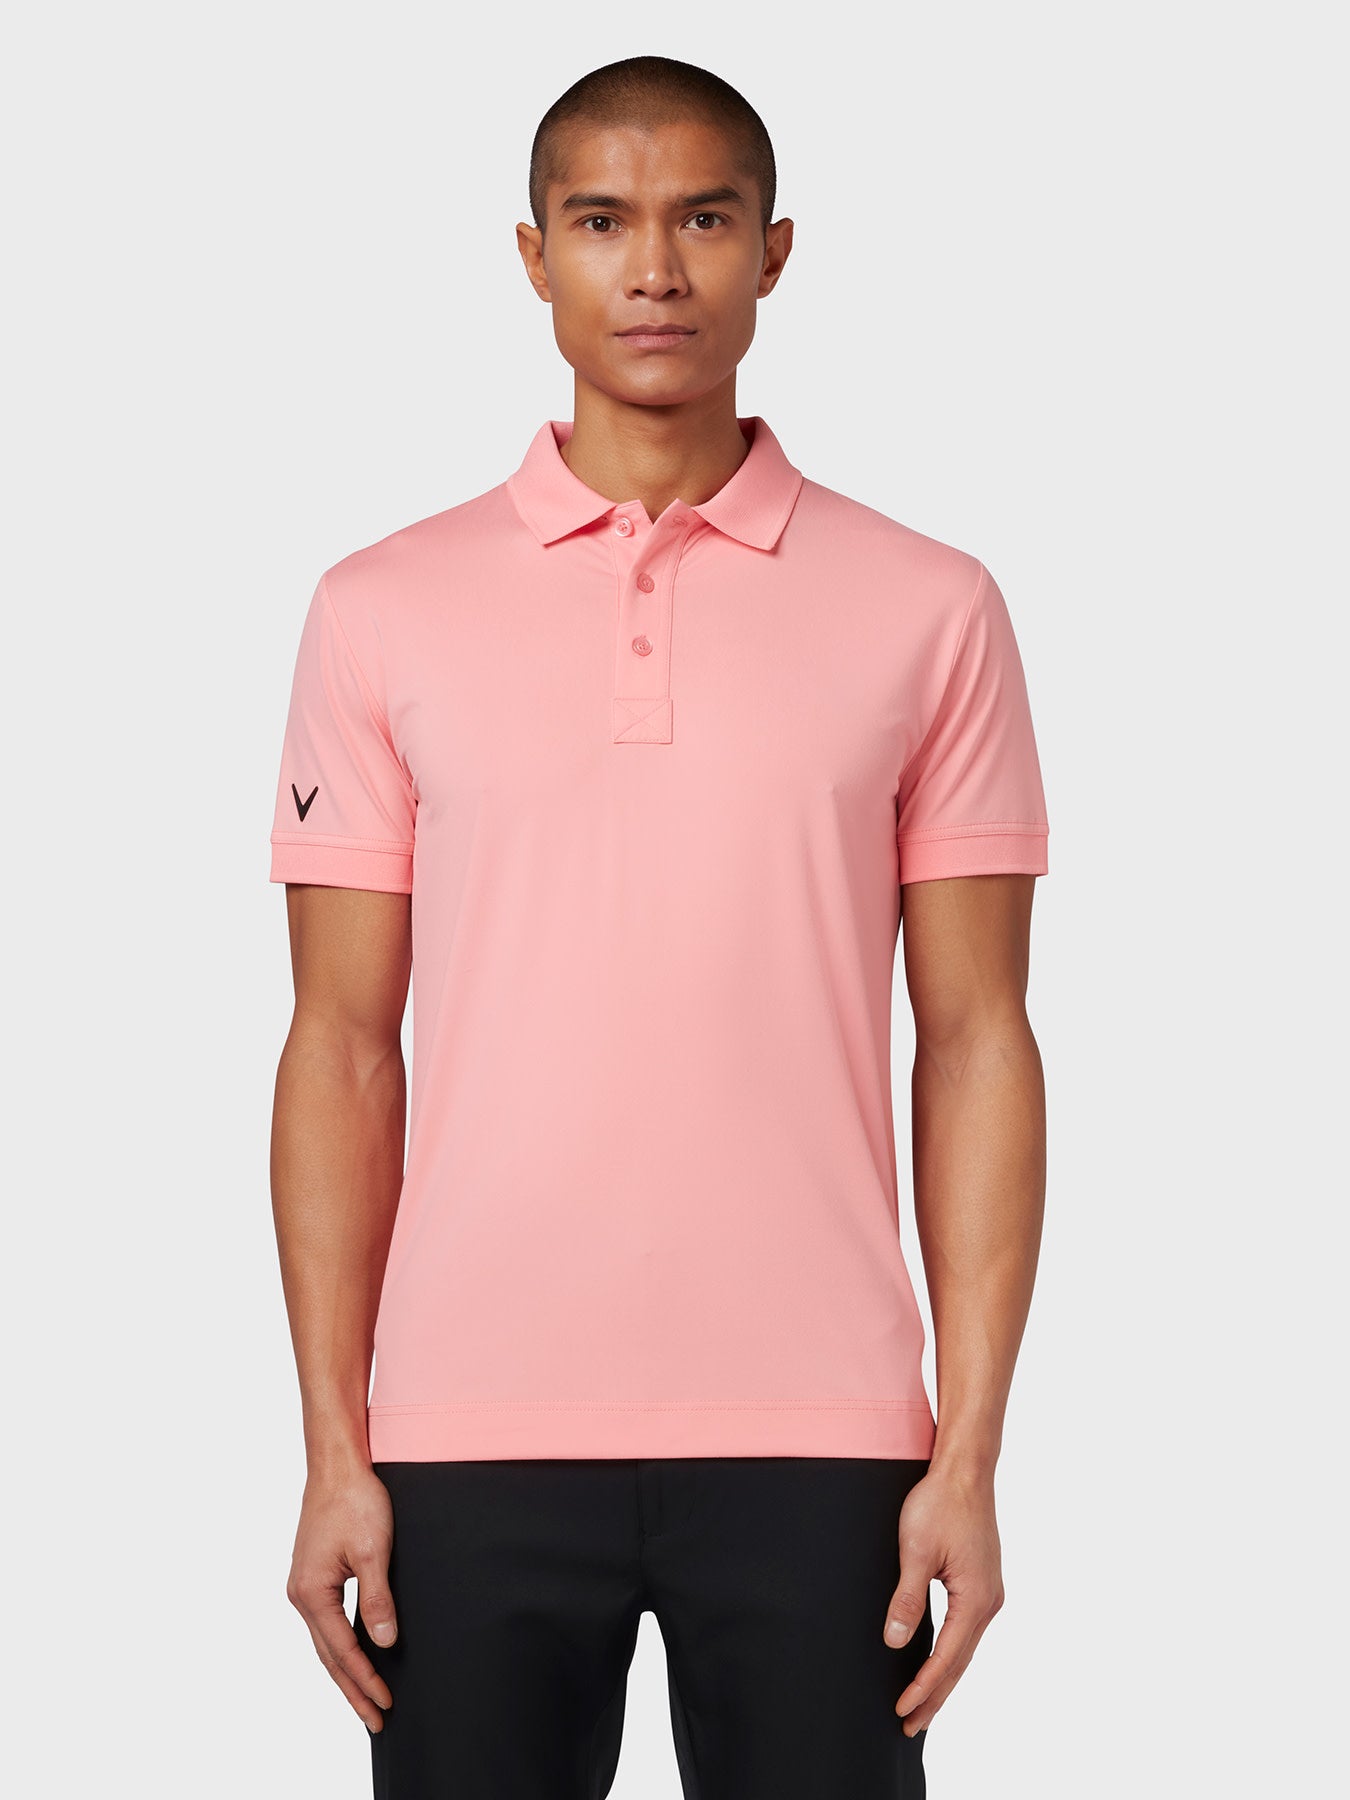 View X Series Solid Ribbed Polo In Geranium Pink Geranium Pink XS information